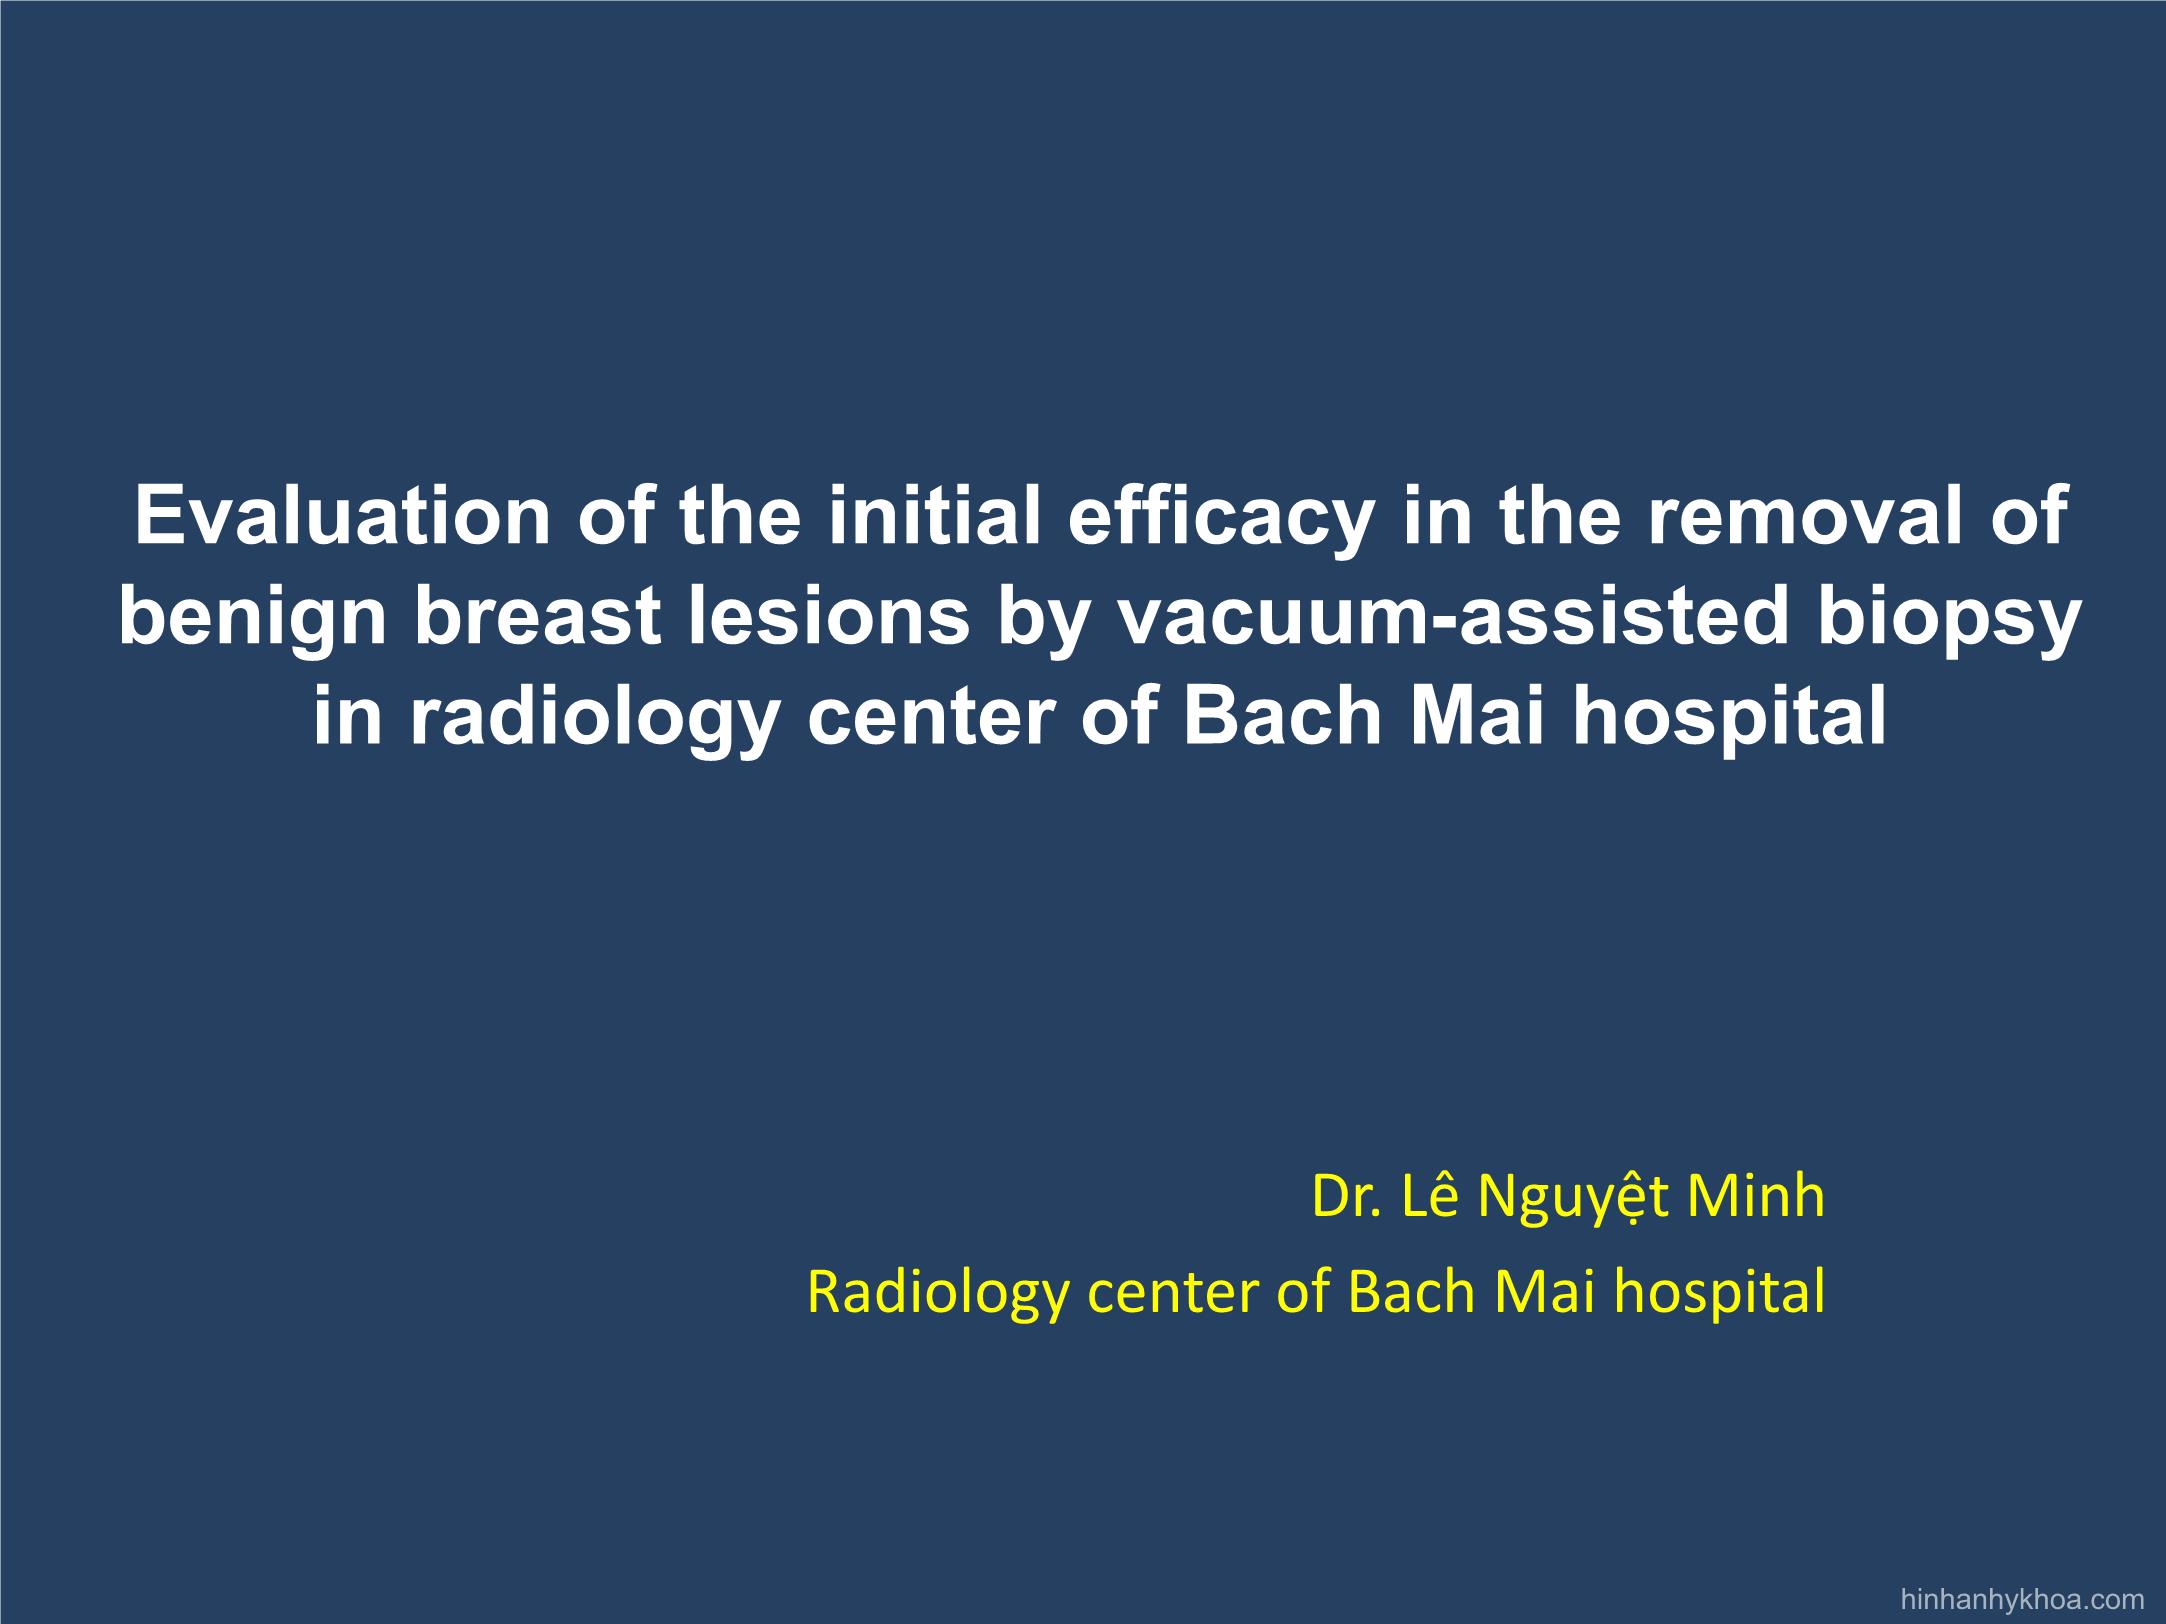 Evaluation of the initial efficacy in the removal of benign breast lesions by vacuum - Assisted biopsy in radiology center of Bach Mai hospital trang 1